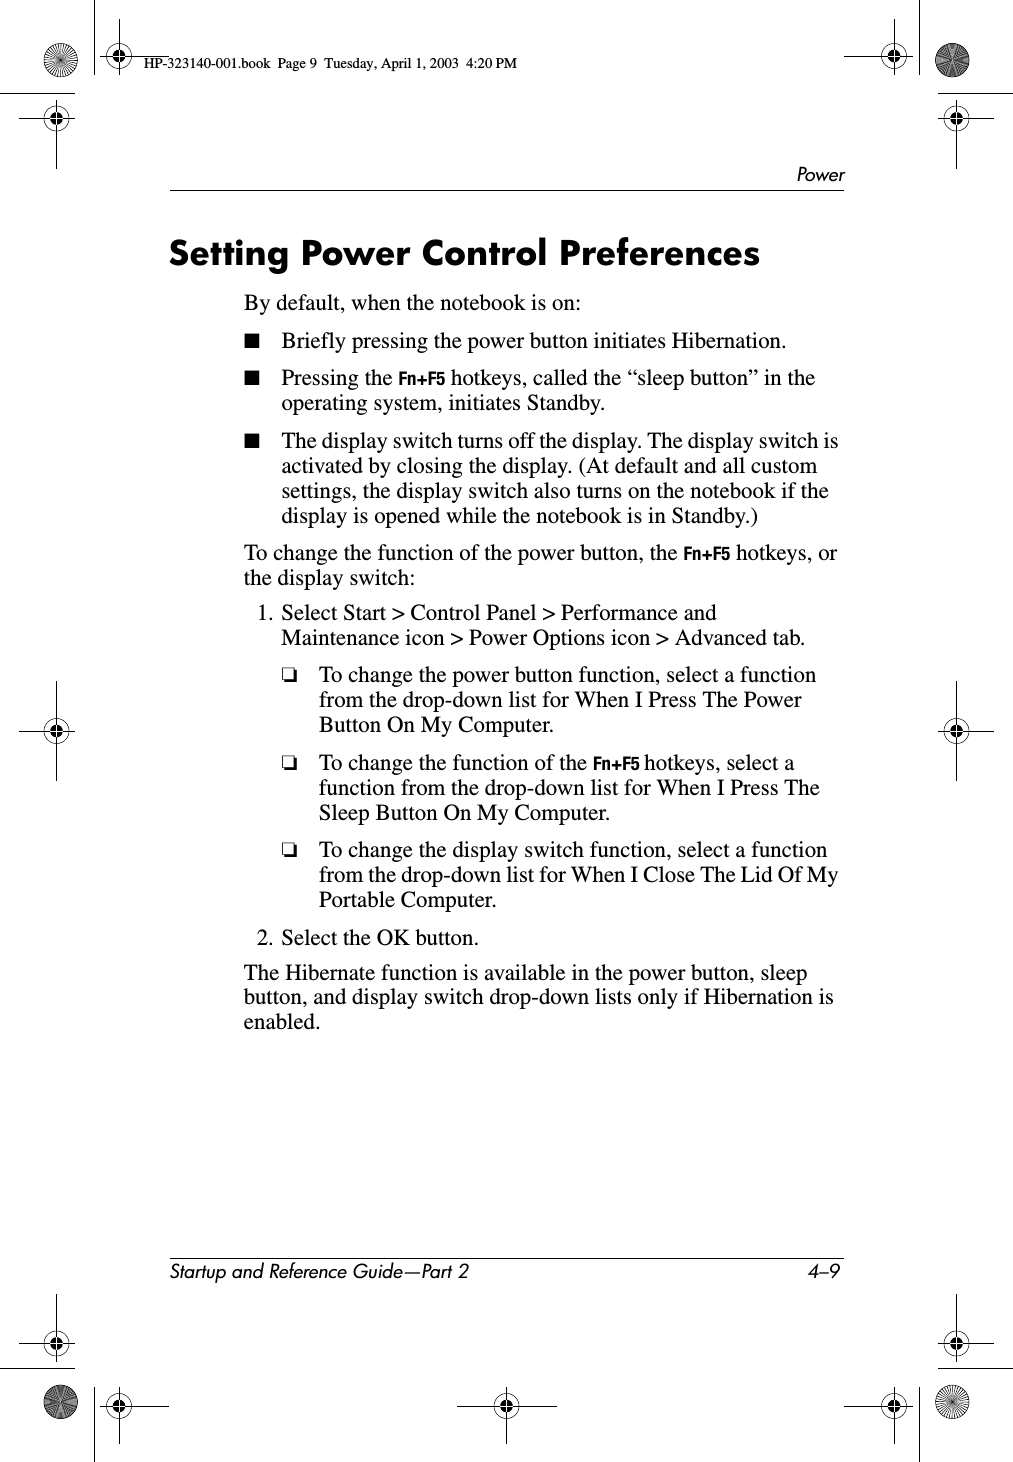 PowerStartup and Reference Guide—Part 2 4–9Setting Power Control PreferencesBy default, when the notebook is on:■Briefly pressing the power button initiates Hibernation.■Pressing the Fn+F5 hotkeys, called the “sleep button” in the operating system, initiates Standby. ■The display switch turns off the display. The display switch is activated by closing the display. (At default and all custom settings, the display switch also turns on the notebook if the display is opened while the notebook is in Standby.)To change the function of the power button, the Fn+F5 hotkeys, or the display switch:1. Select Start &gt; Control Panel &gt; Performance and Maintenance icon &gt; Power Options icon &gt; Advanced tab.❏To change the power button function, select a function from the drop-down list for When I Press The Power Button On My Computer.❏To change the function of the Fn+F5 hotkeys, select a function from the drop-down list for When I Press The Sleep Button On My Computer.❏To change the display switch function, select a function from the drop-down list for When I Close The Lid Of My Portable Computer.2. Select the OK button.The Hibernate function is available in the power button, sleep button, and display switch drop-down lists only if Hibernation is enabled.HP-323140-001.book  Page 9  Tuesday, April 1, 2003  4:20 PM